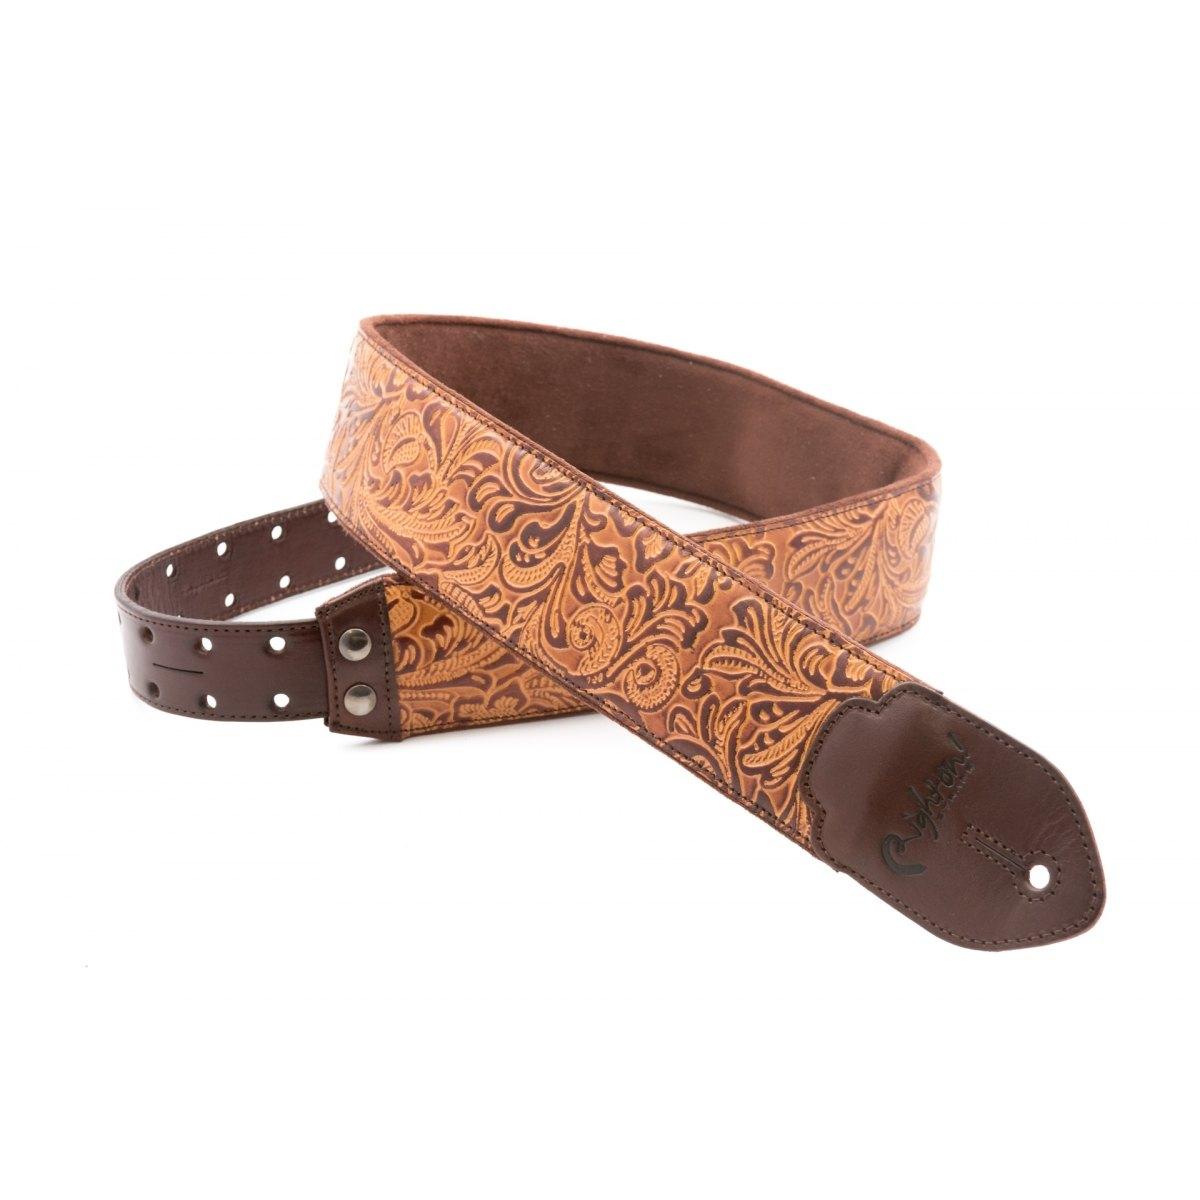 Right on straps blackguard brown